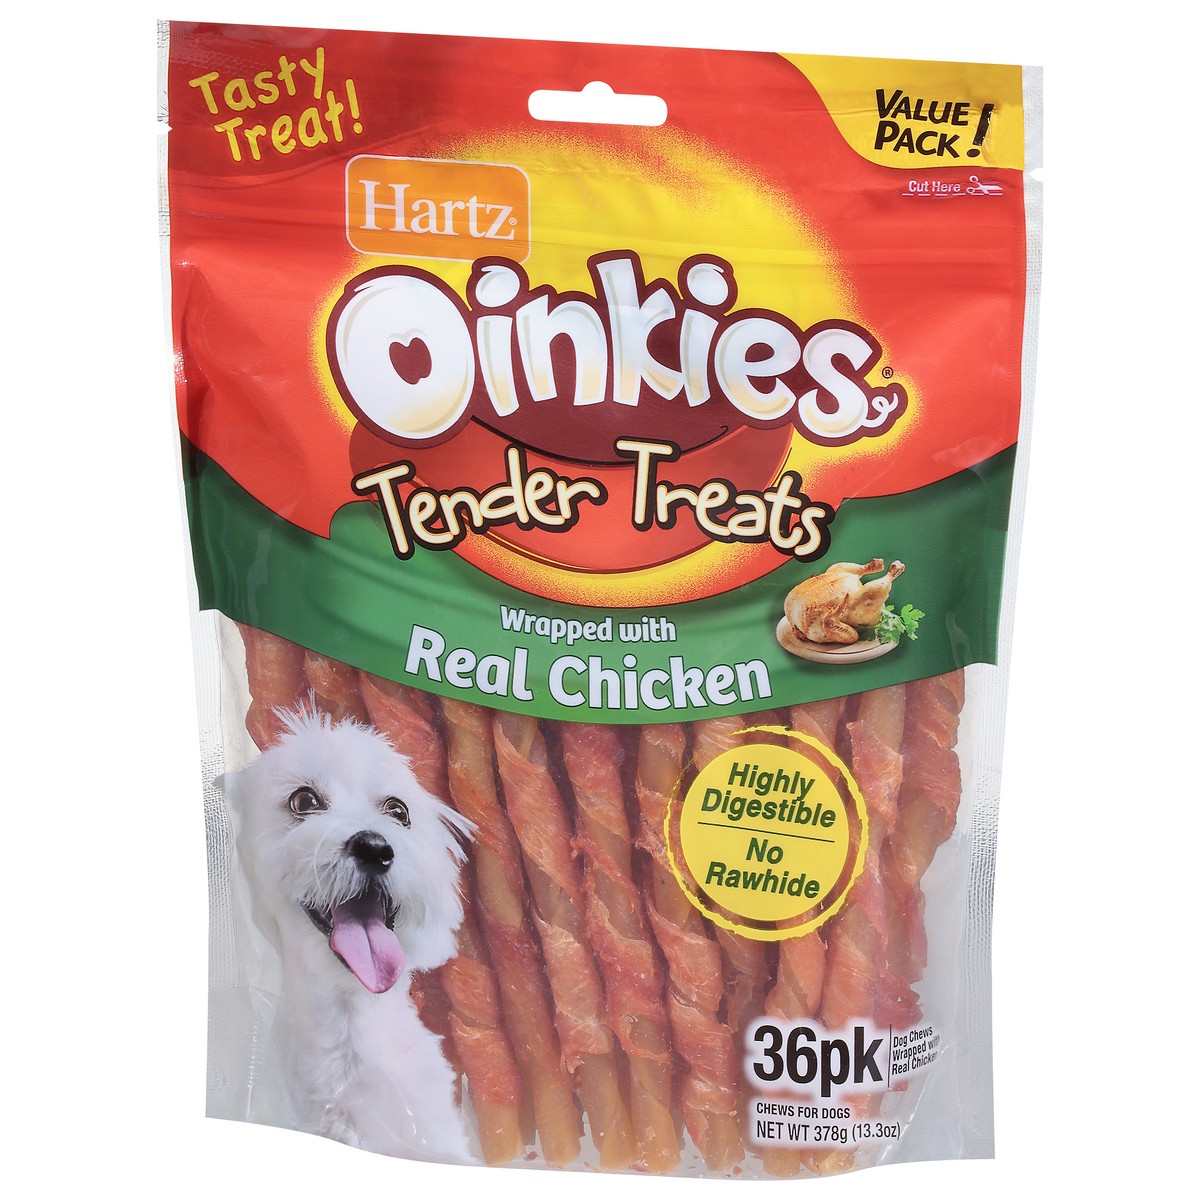 slide 3 of 10, Hartz Oinkies Value Pack Tender Treats Wrapped with Real Chicken Chews for Dogs 36 ea, 36 ct